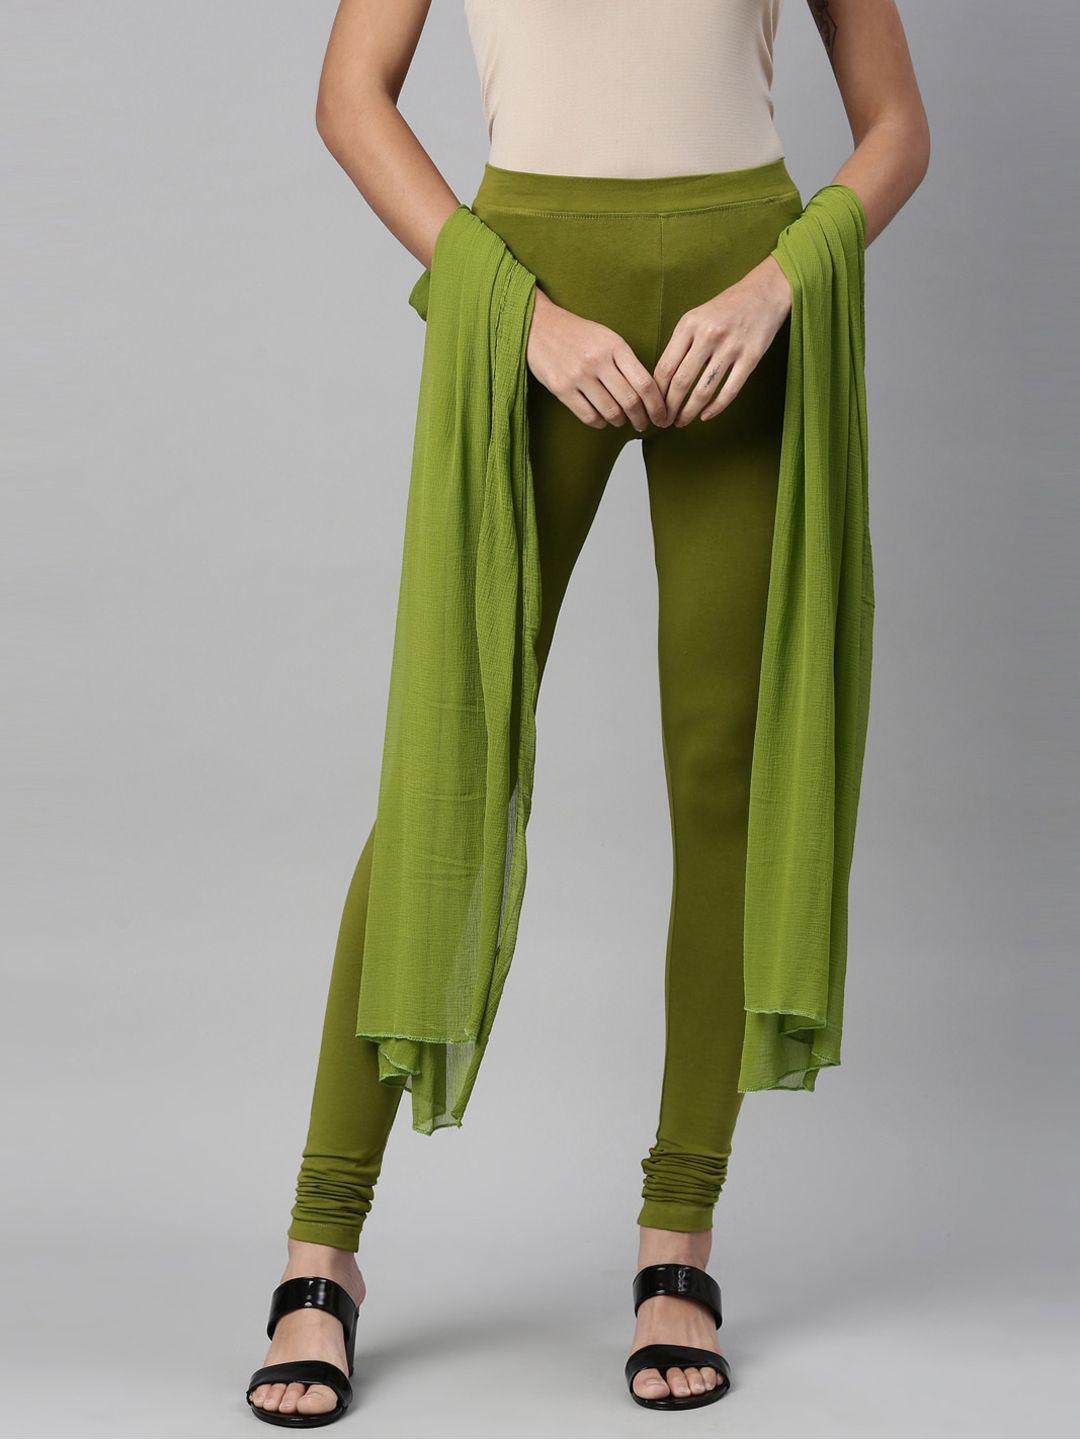 twin birds women olive-green solid ankle-length leggings with shawl